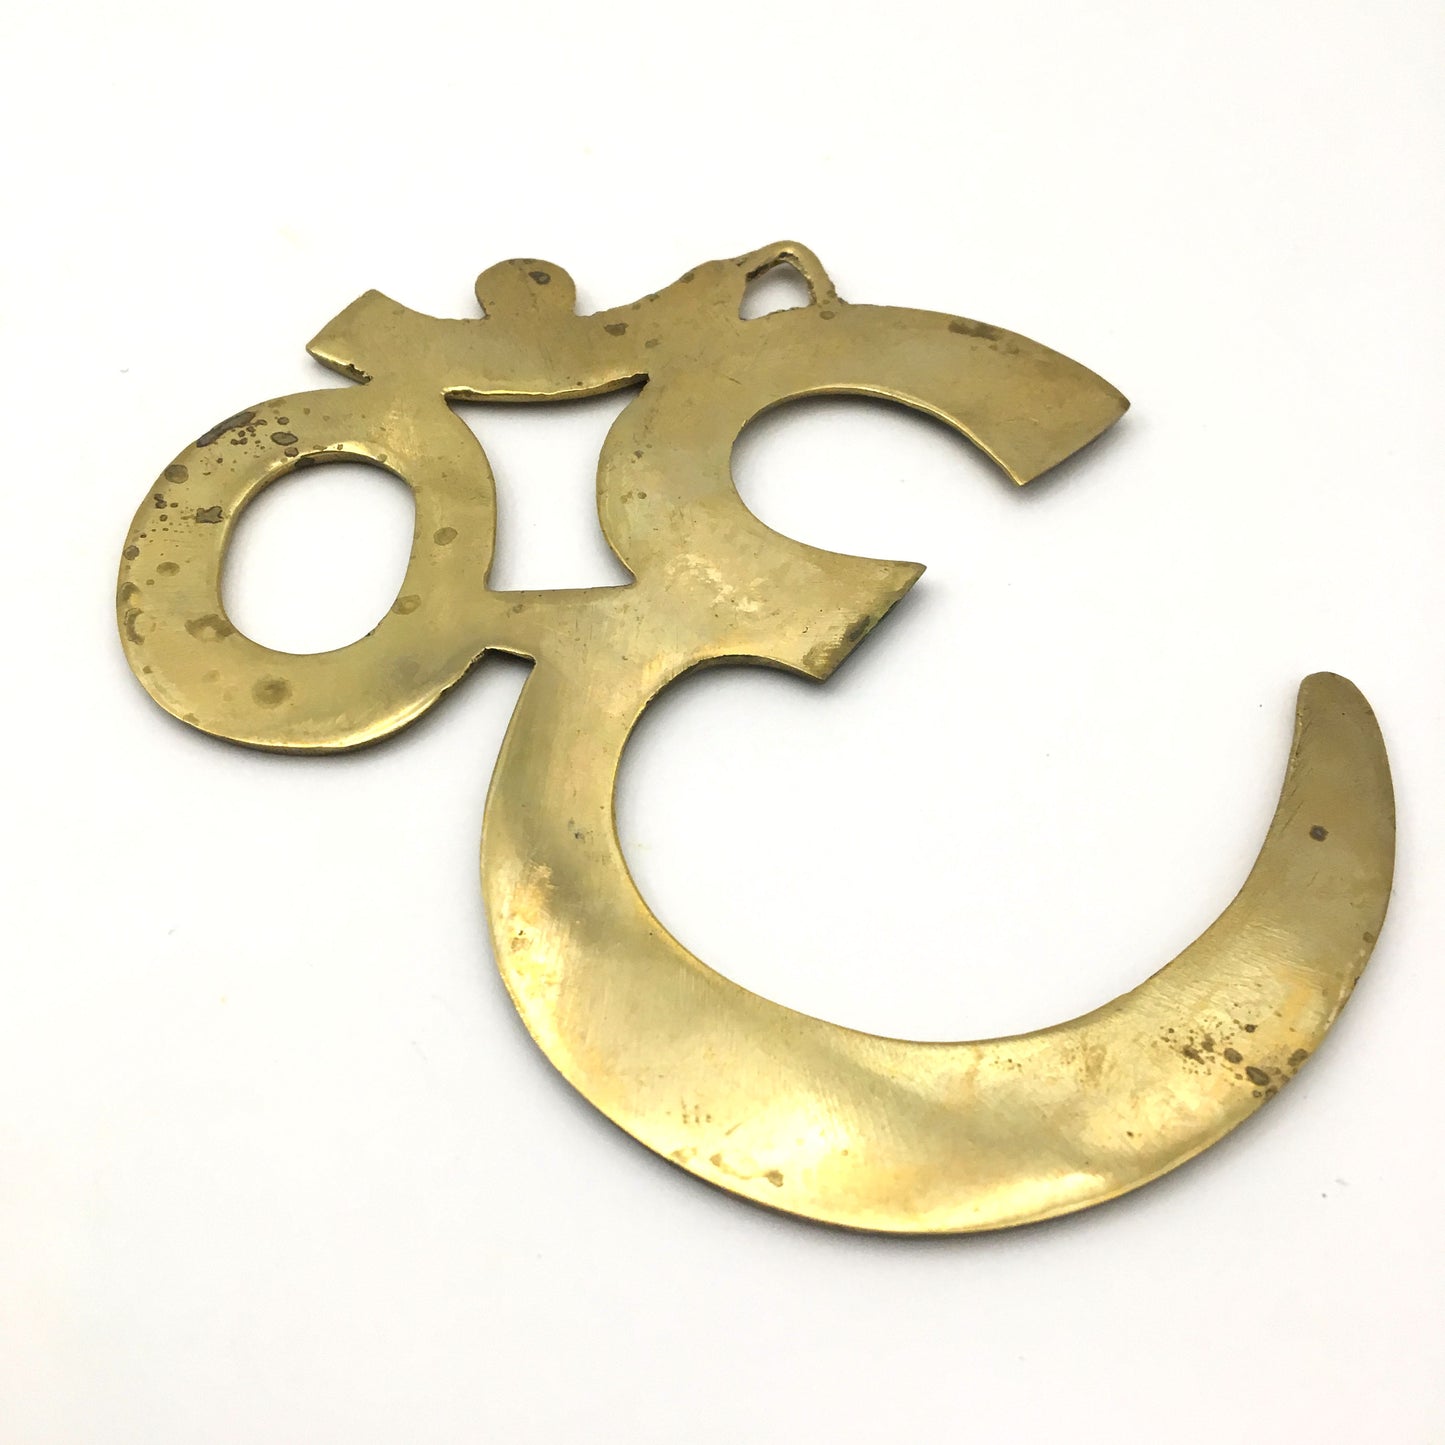 Pair of Om Symbols Hand-crafted India Brass Decorative Wall Hanging- Detailed